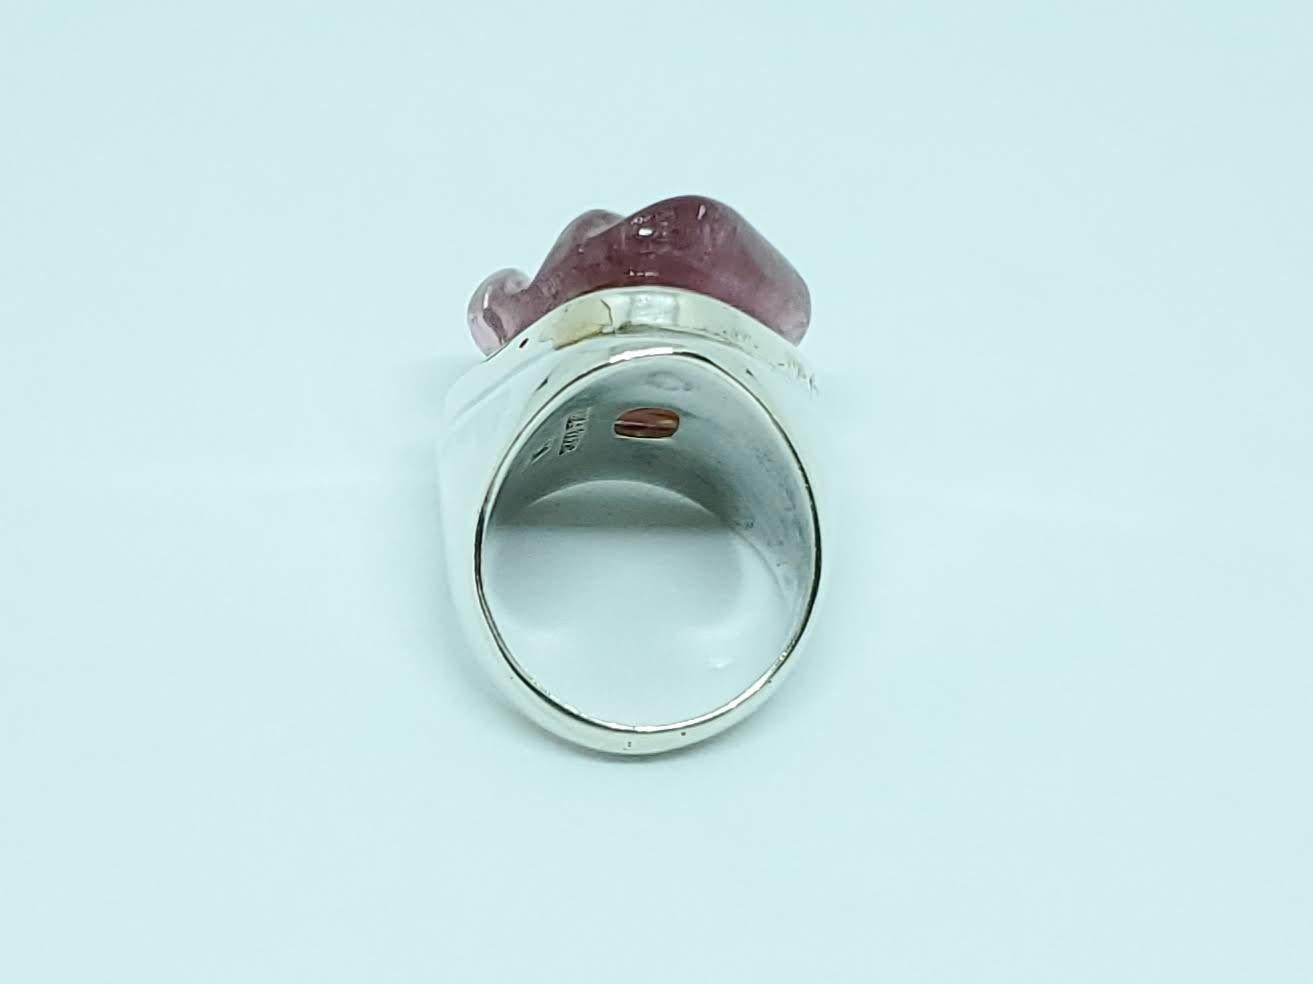 Burle Marx Sterling Silver Freeform 'Forma Livre' Tourmaline Ring In Good Condition For Sale In Woodway, TX